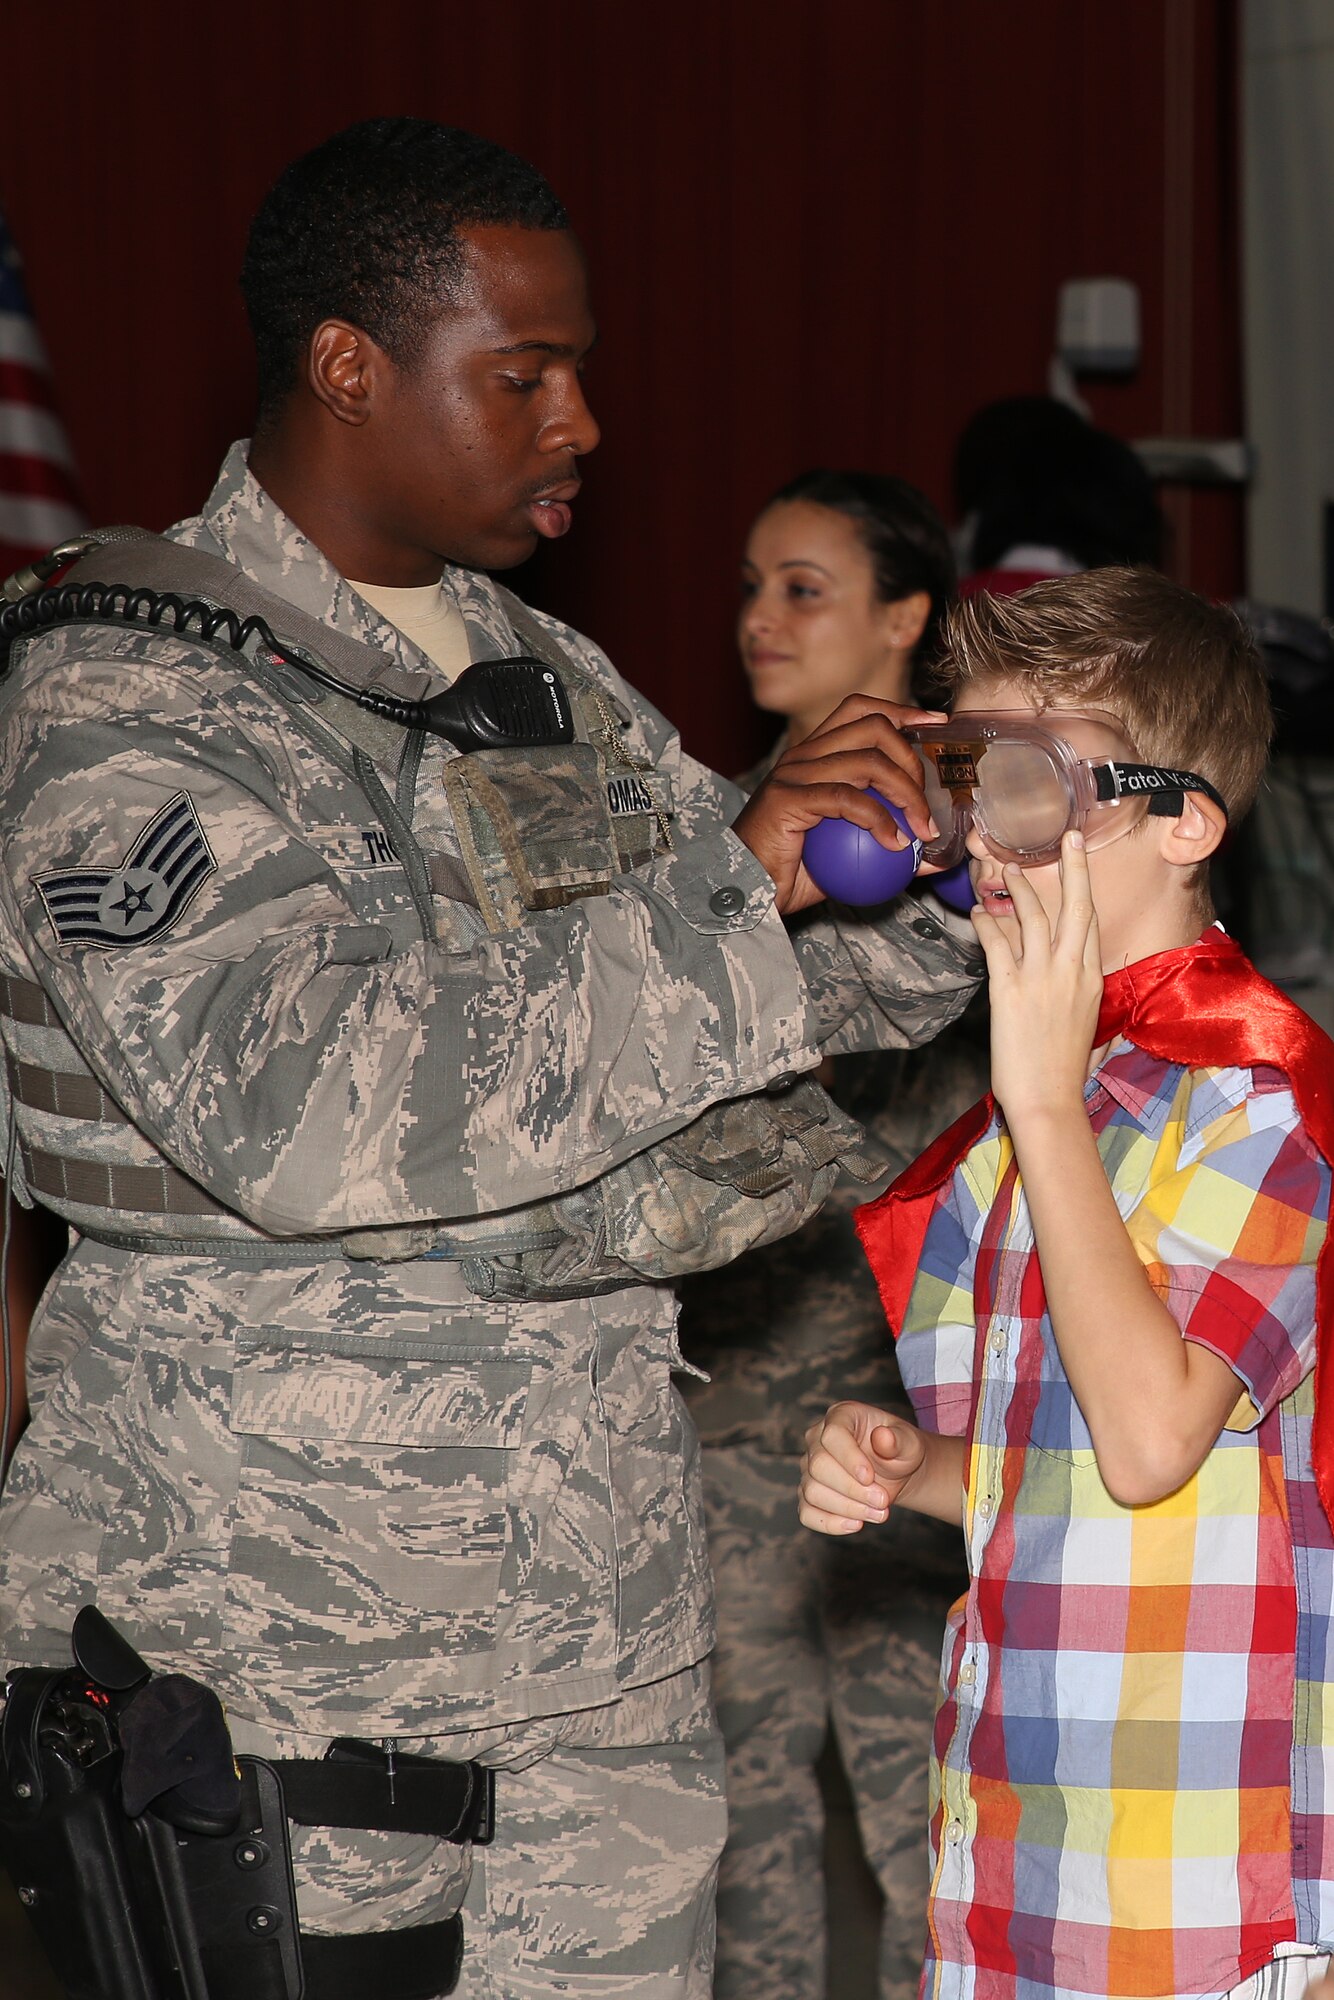 Staff Sgt. Fanciscus Thomas, 36th Security Forces Squadron Alpha Flight assistant chief, helps a student put on fatal vision goggles for a presentation Oct. 29, 2014, at Andersen Elementary School. Students and staff members were given the opportunity to participate in interactive field sobriety tests with 36th SFS Airmen while wearing the goggles to simulate vision impaired by drugs or alcohol.
(U.S. Air Force photo by Staff Sgt. Melissa B. White/Released)
